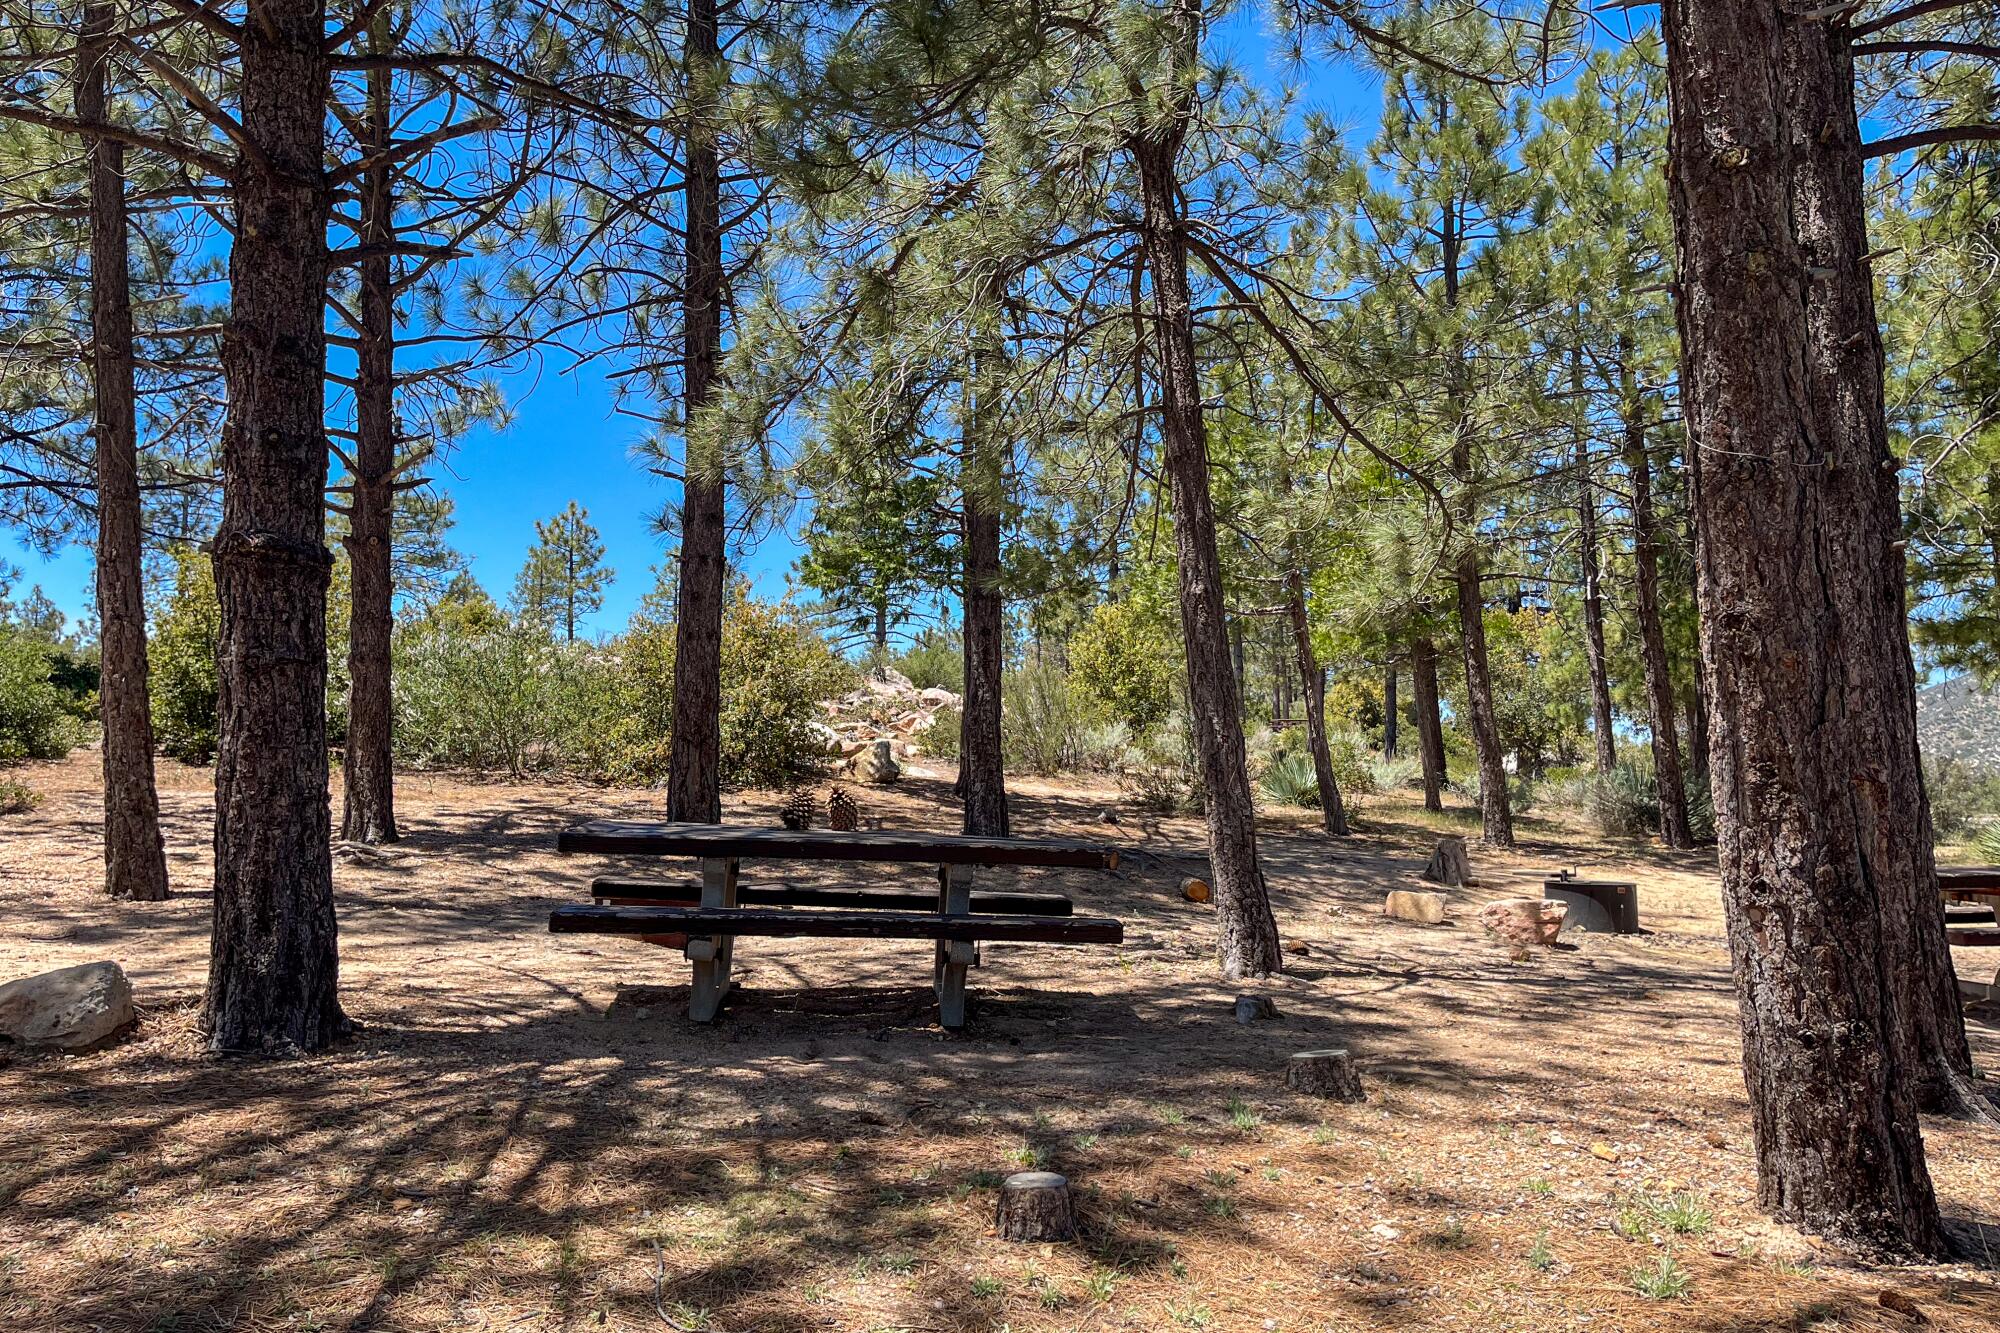 A picnic table in a campground surrounded by pine trees of varying sizes